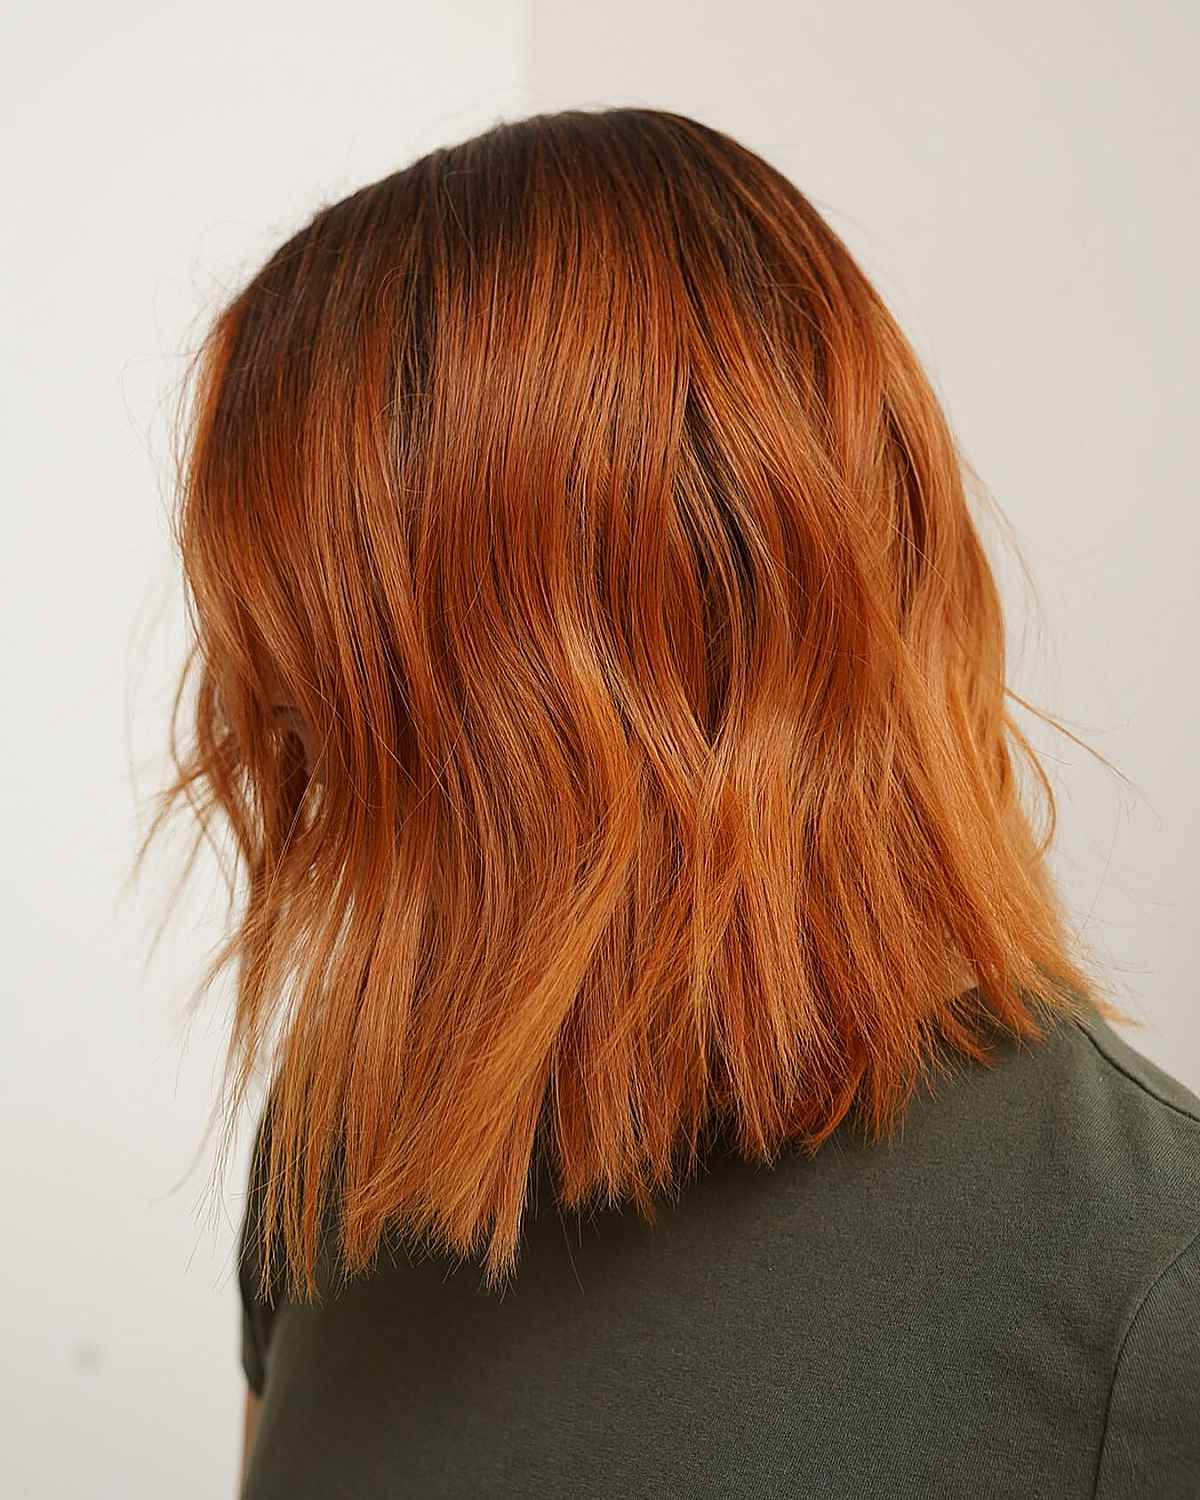 34 Stunning Orange Hair Color Shades You Have to See